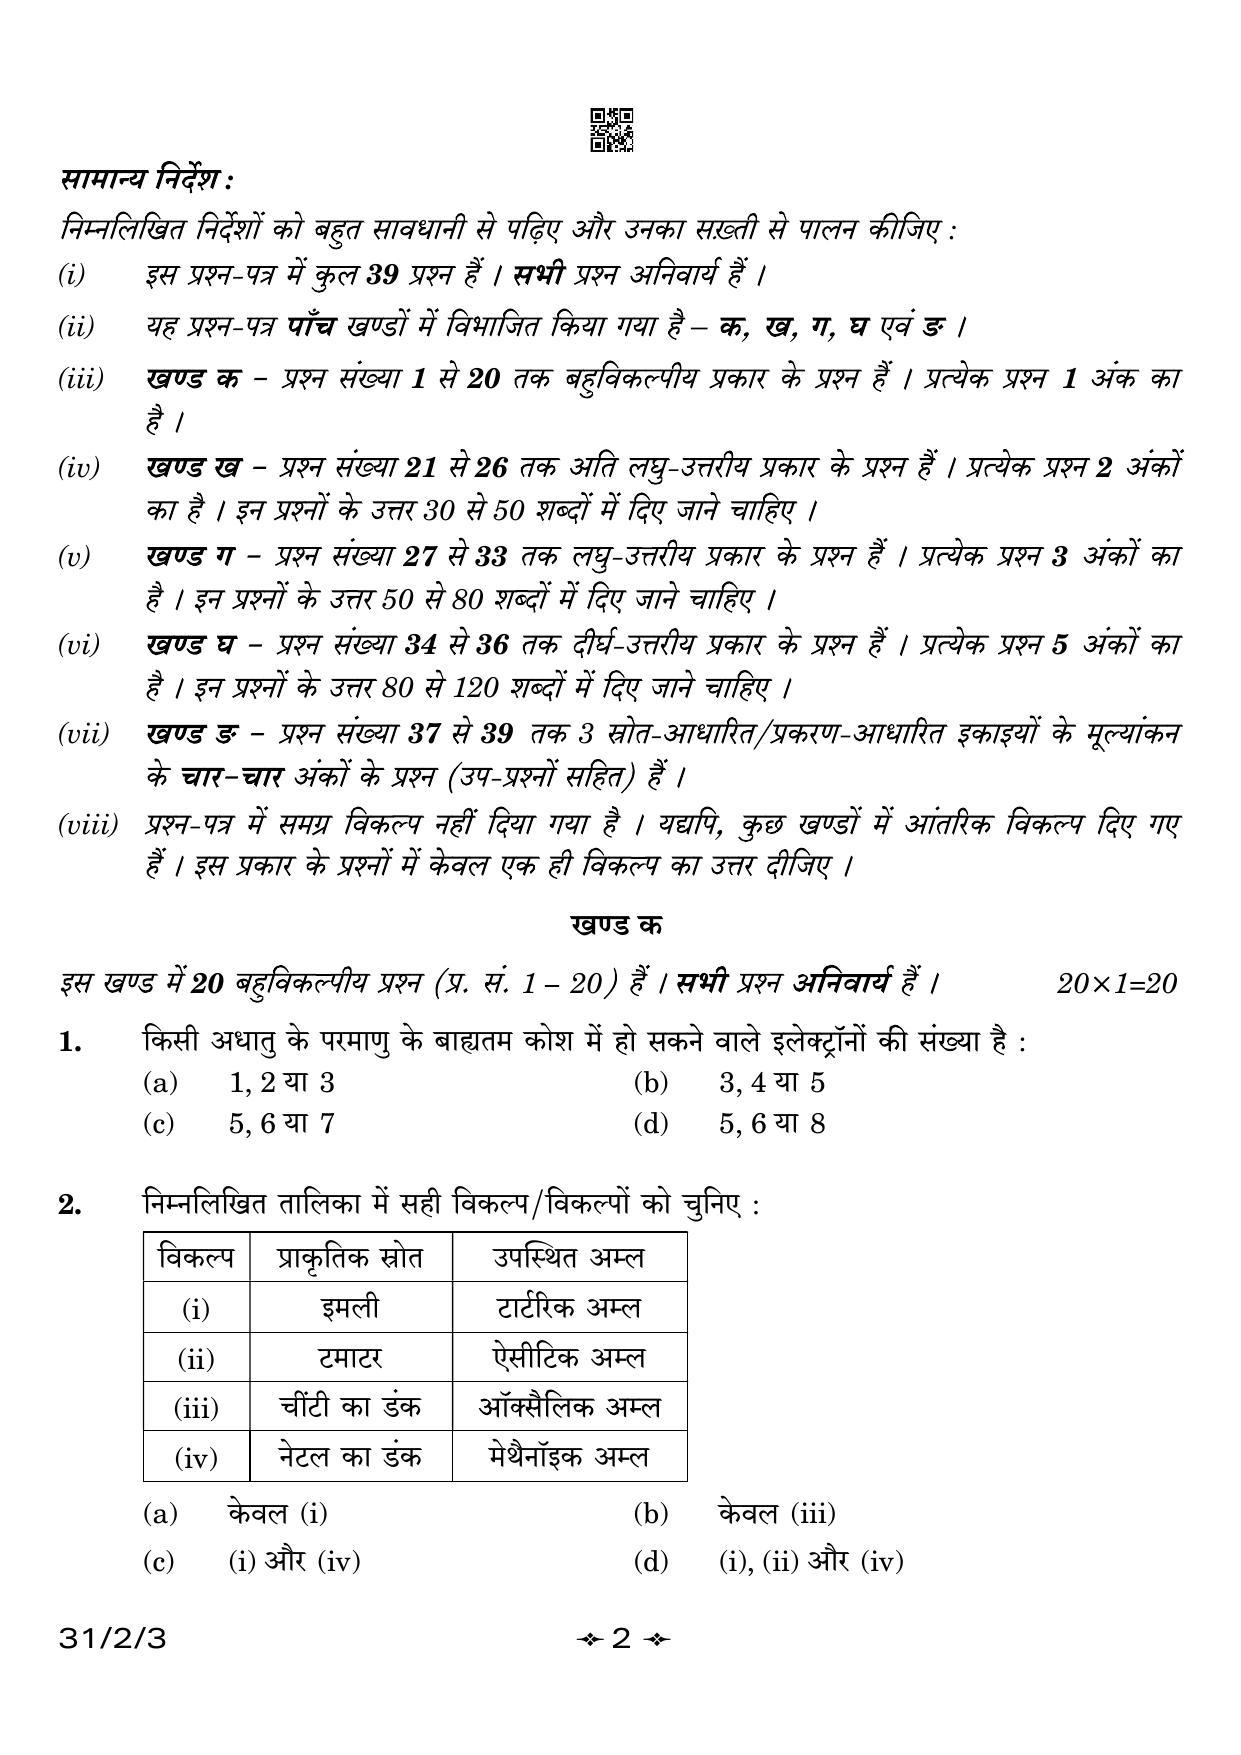 CBSE Class 10 31-2-3 Science 2023 Question Paper - Page 2